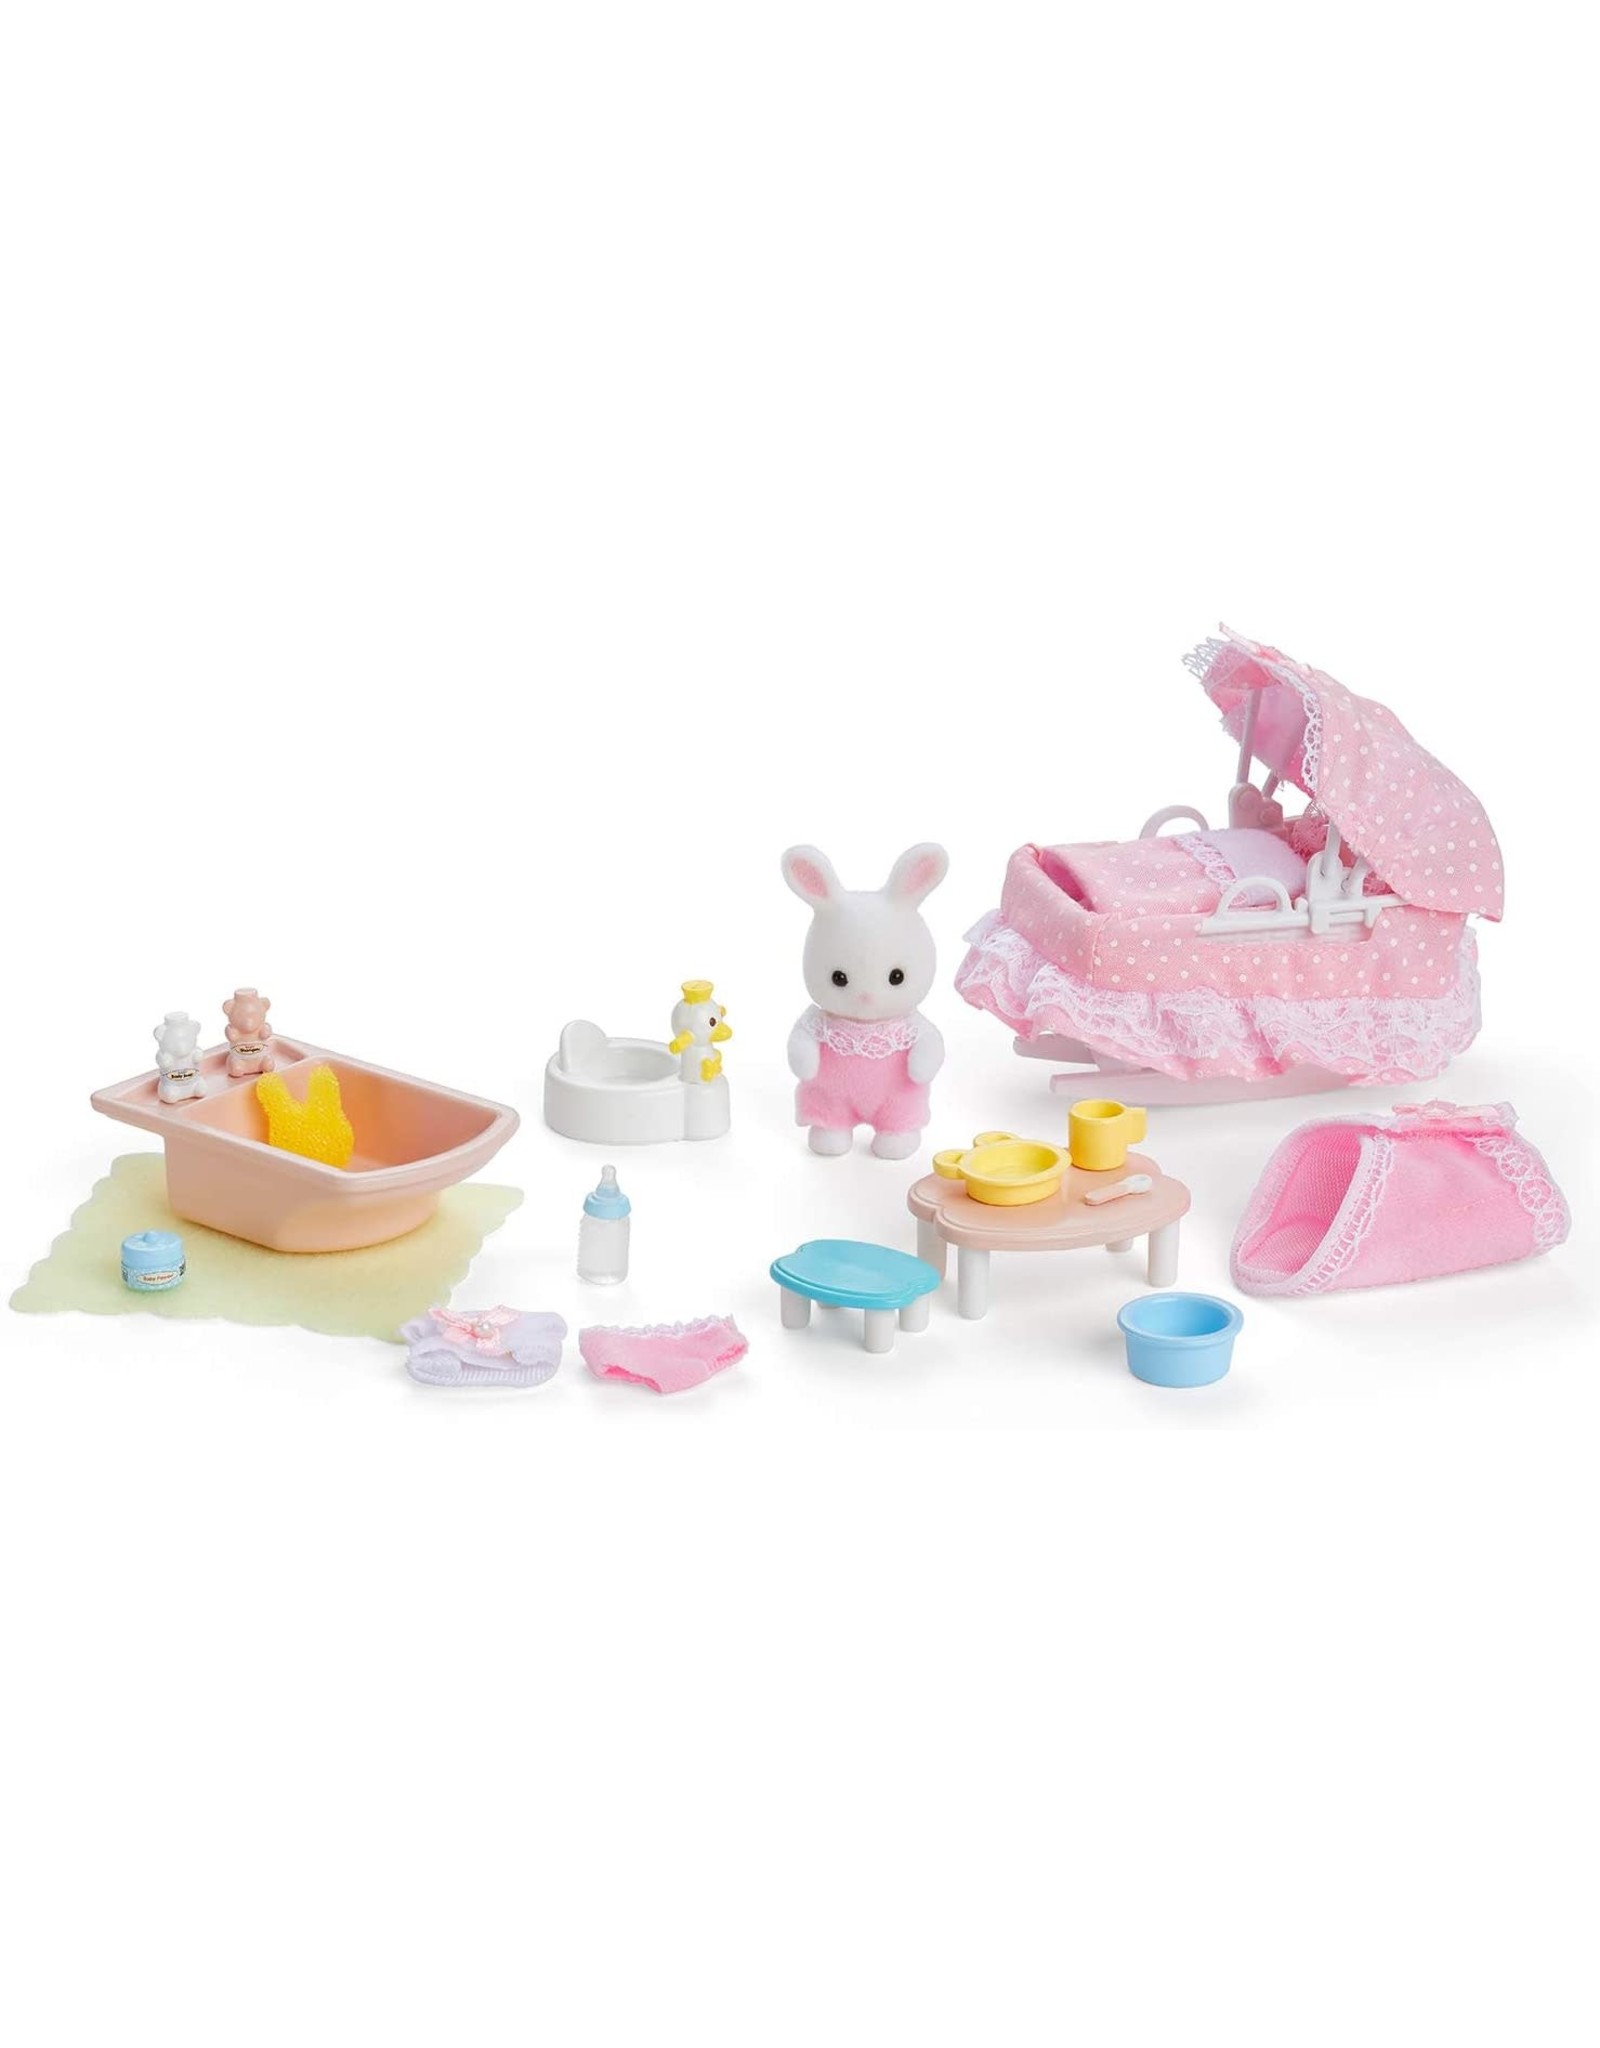 Calico Critters Calico Critters Sophie's Love 'n Care Set